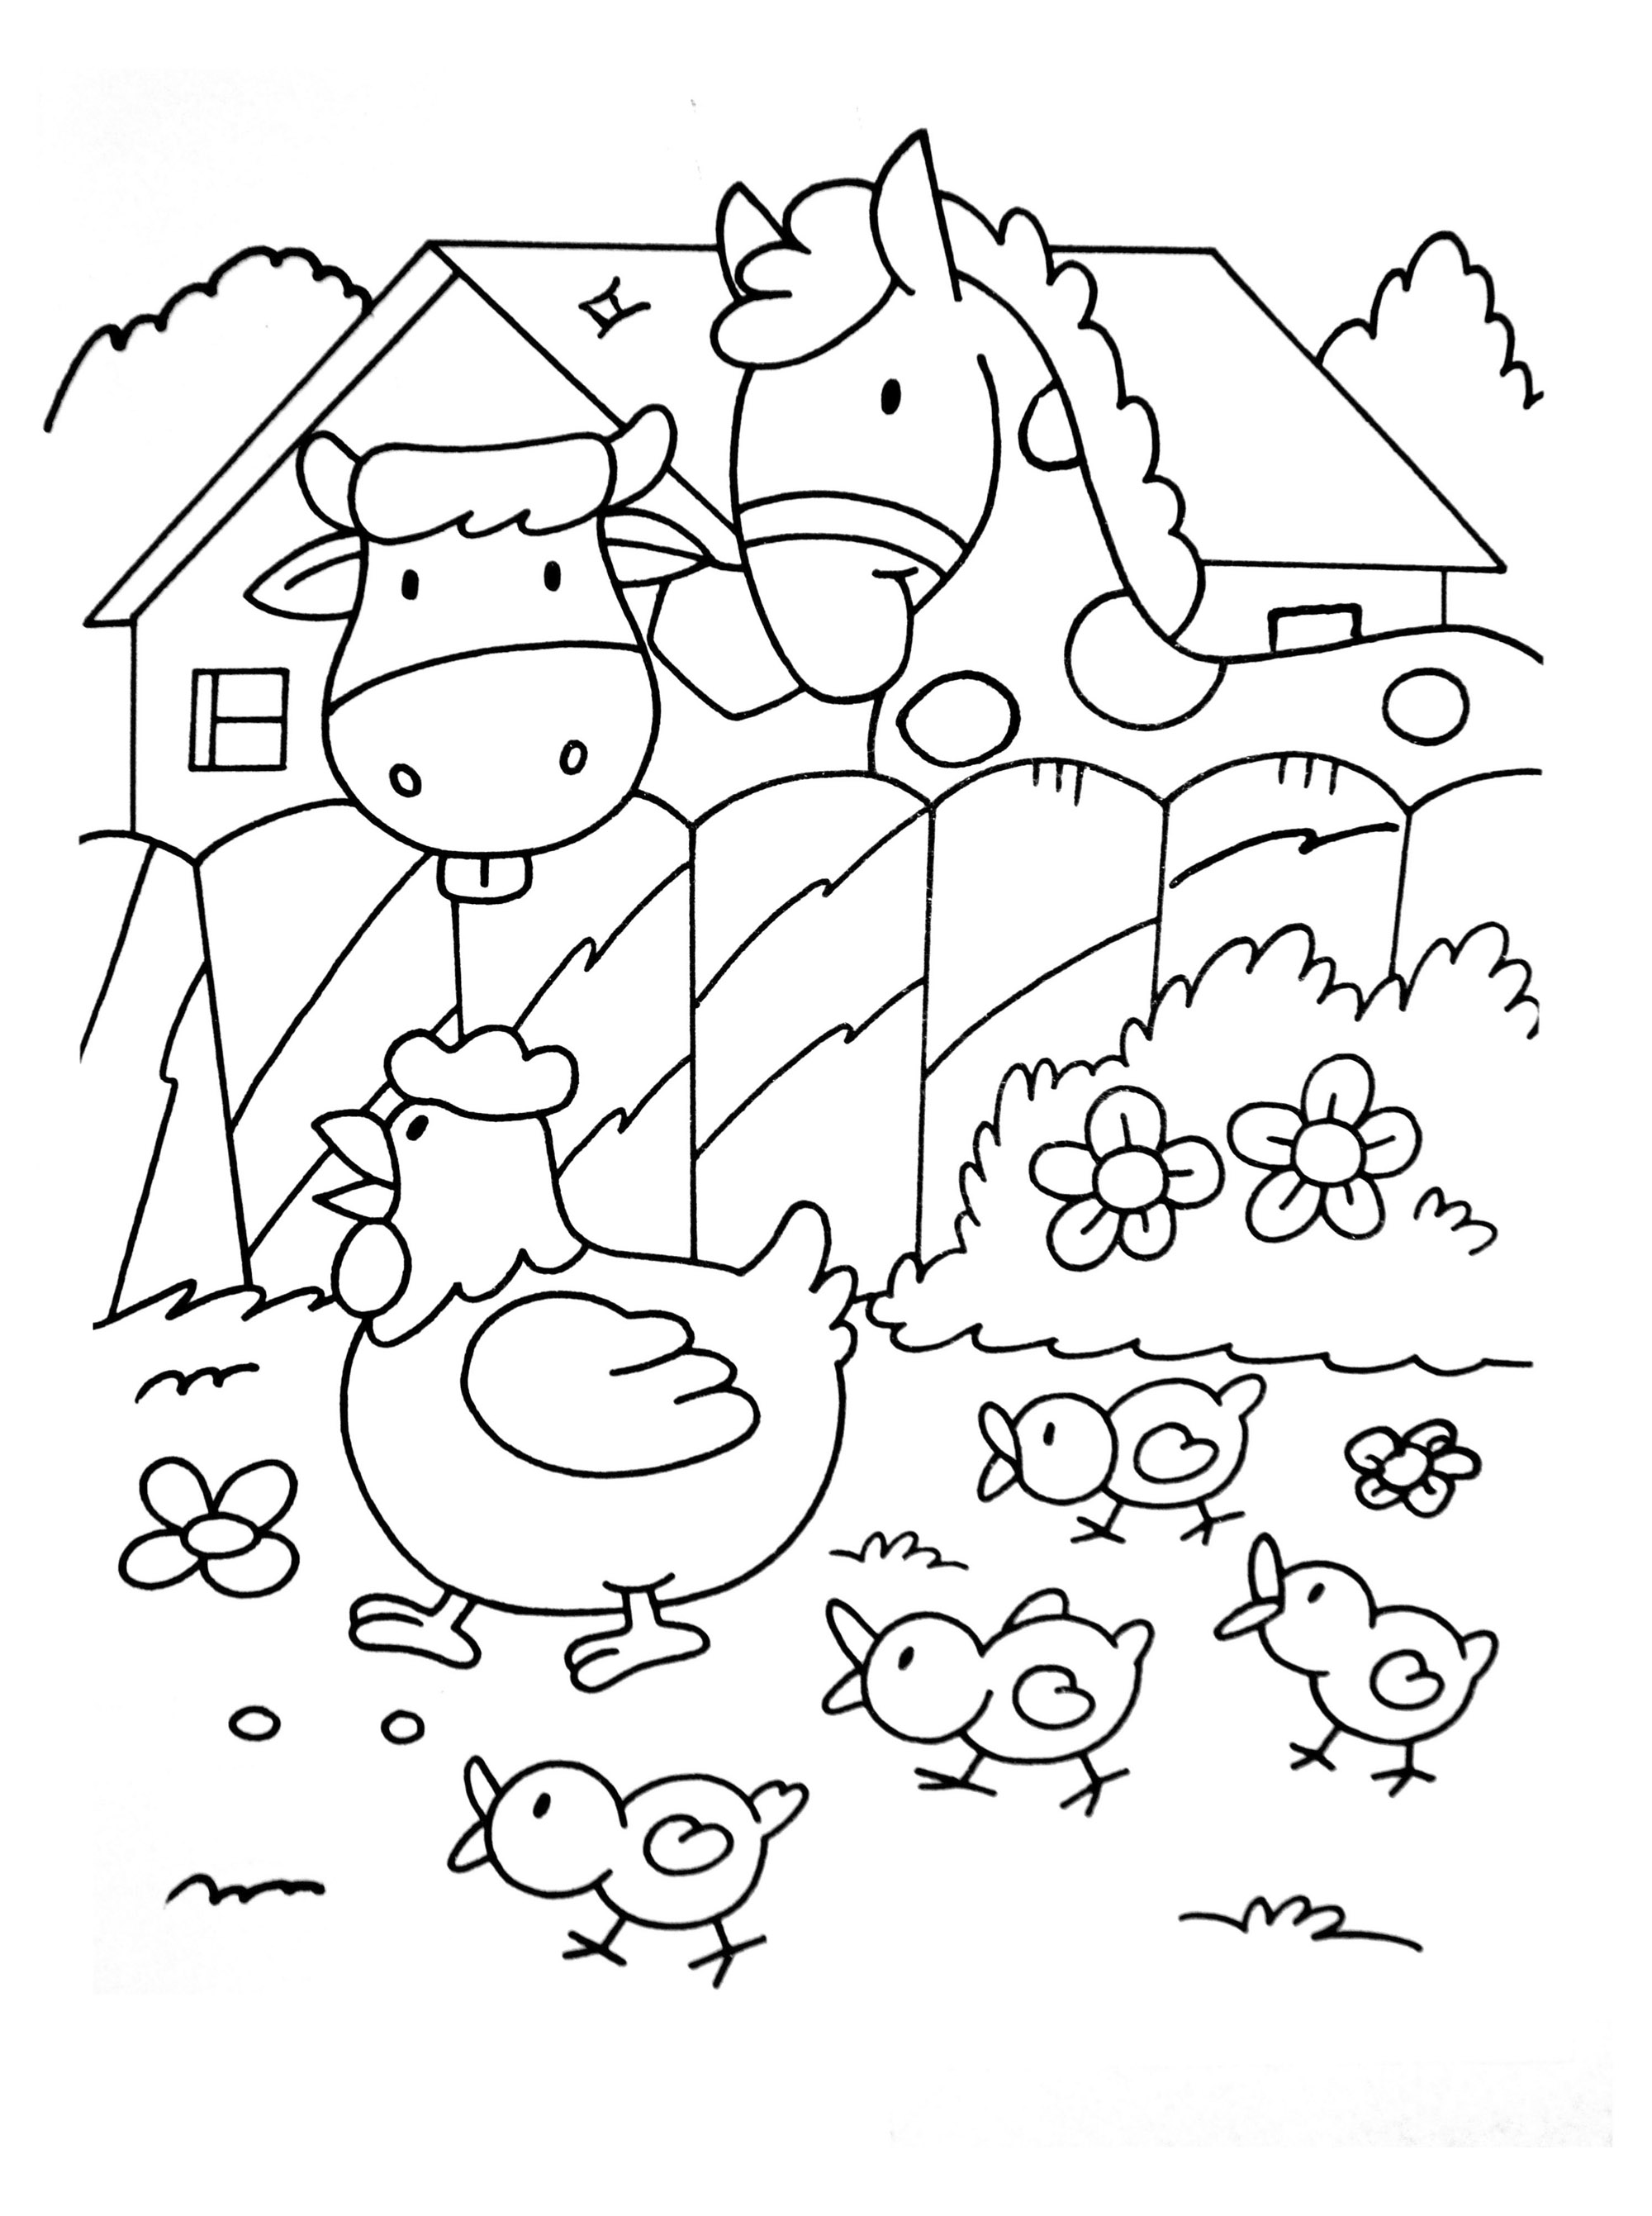 coloring pages kid farm animal